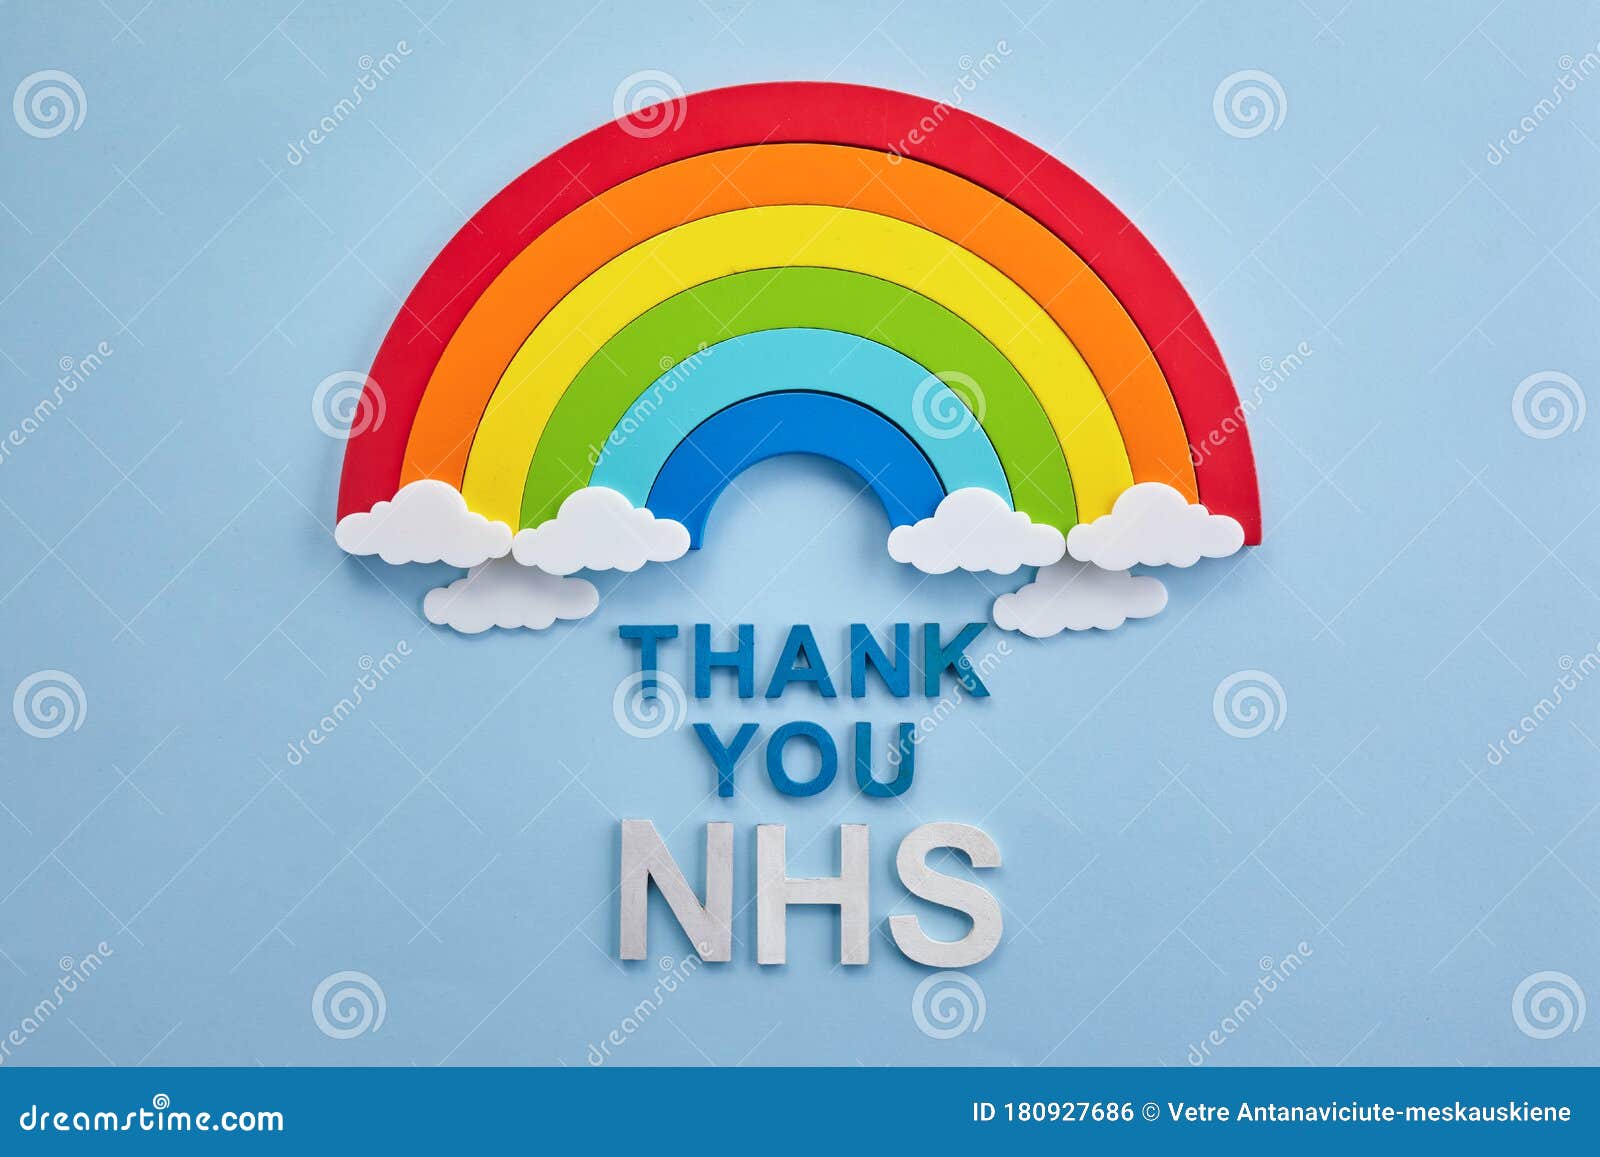 thank you nhs rainbow banner. rainbow ob blue background with letters